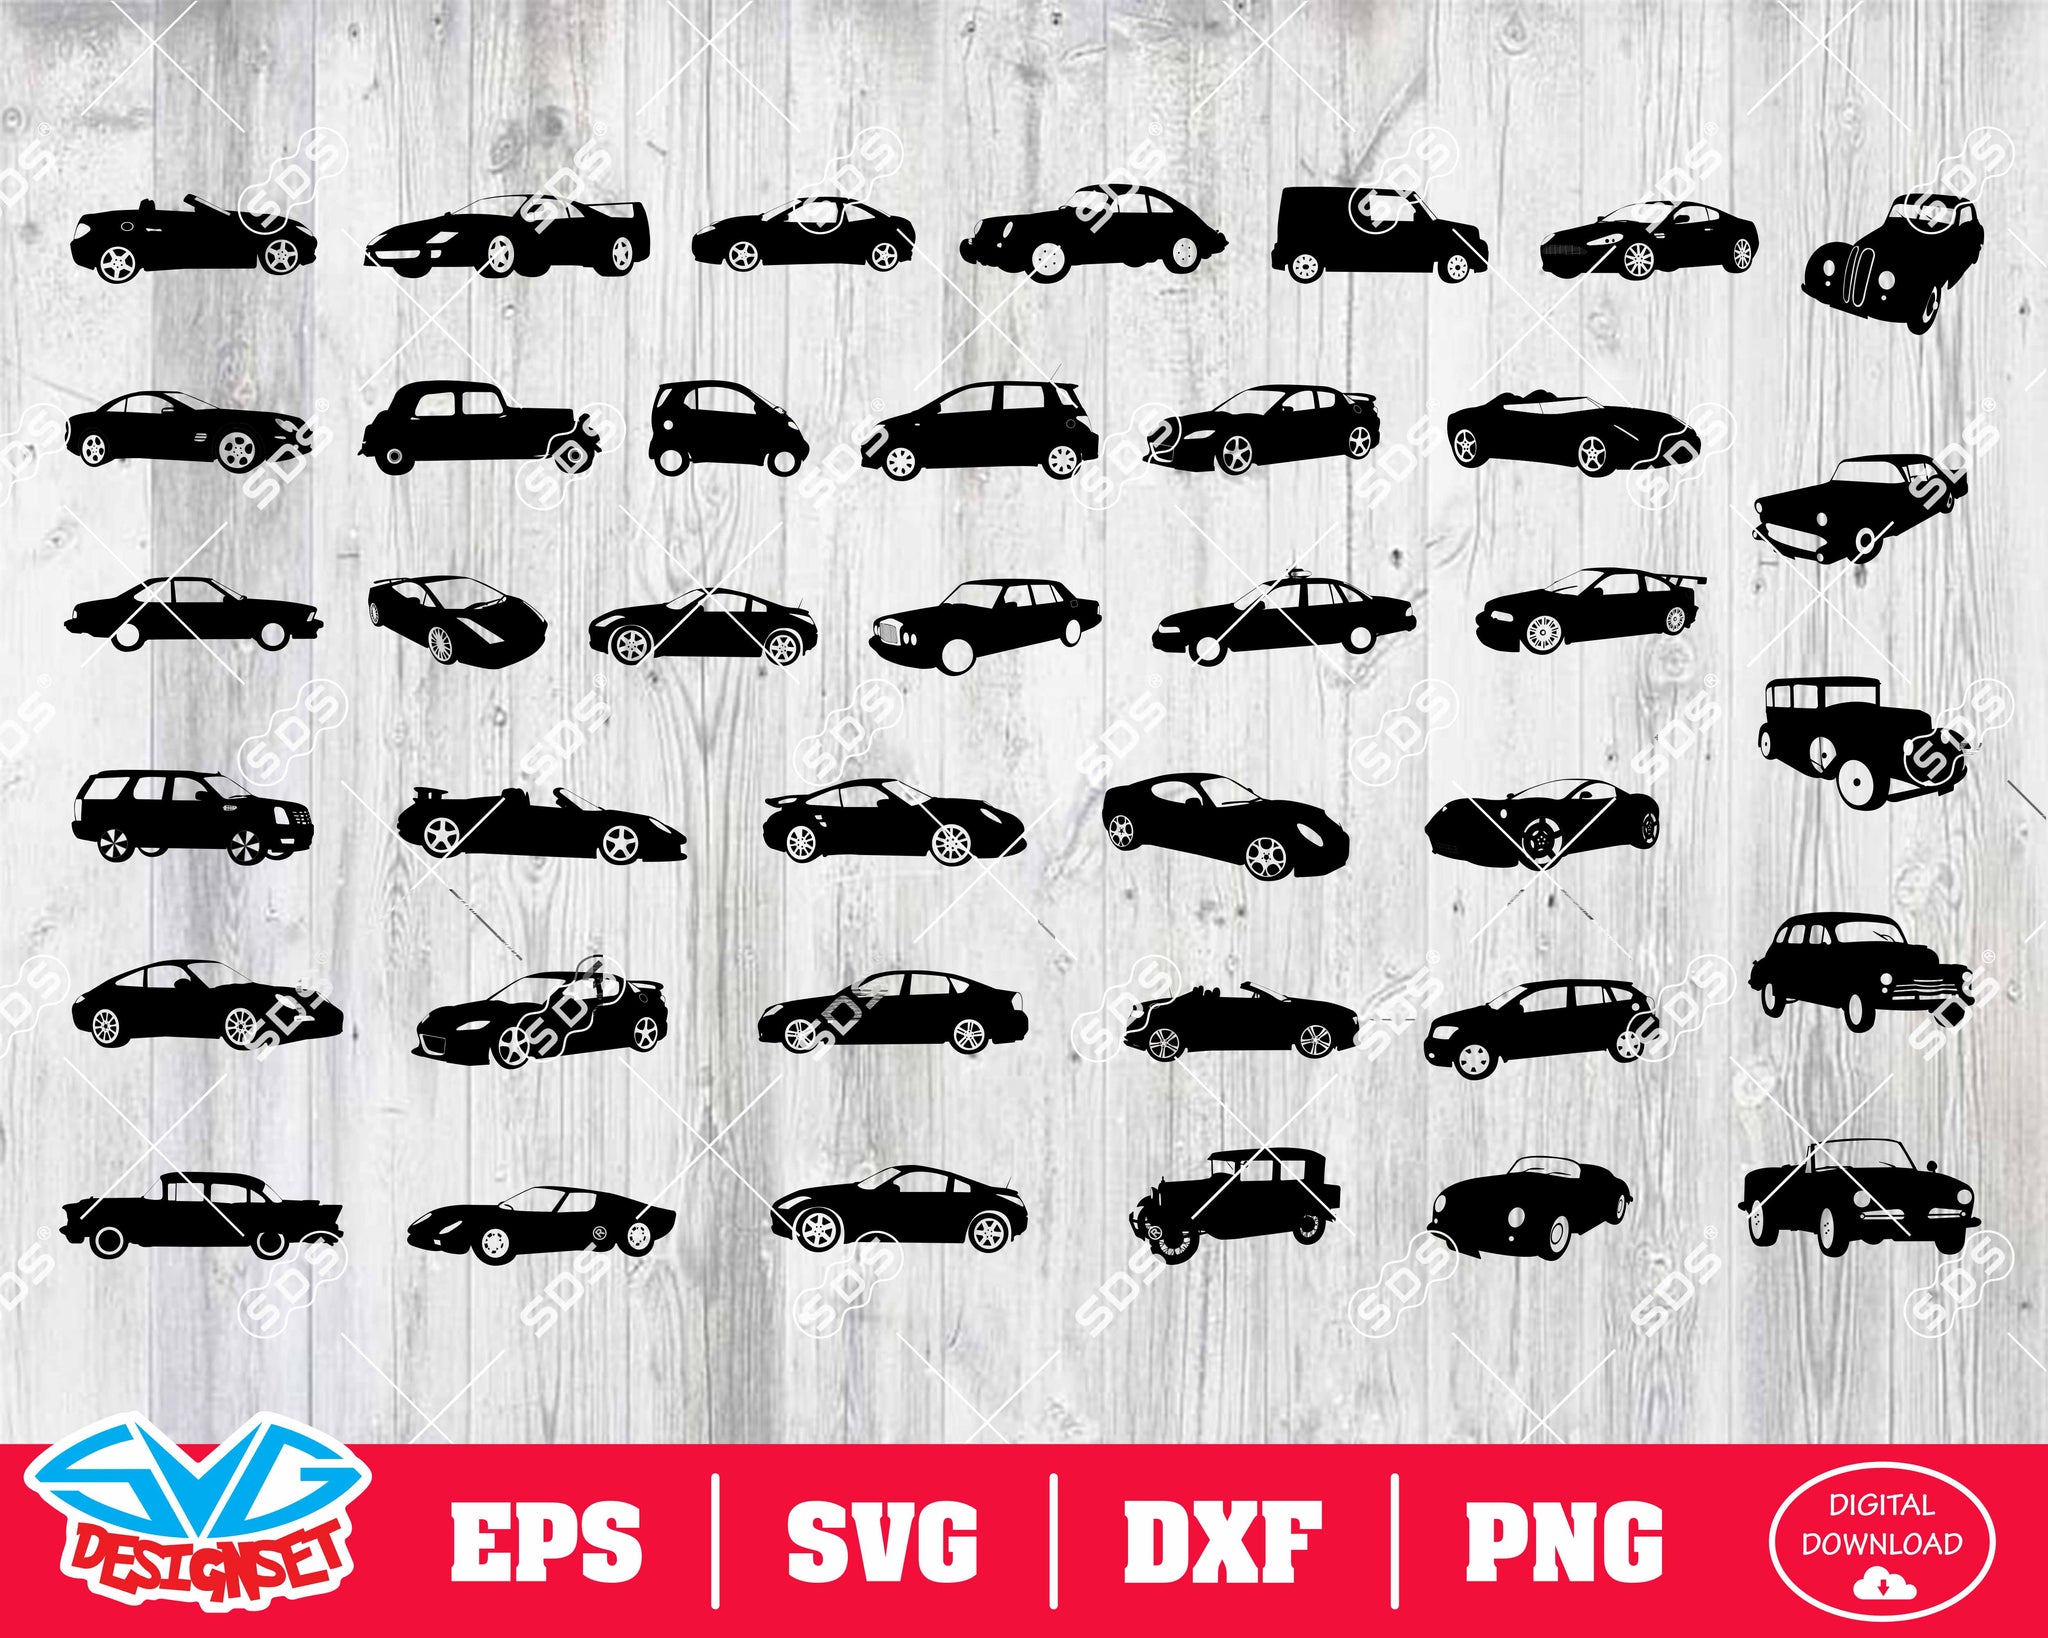 Cars Svg, Dxf, Eps, Png, Clipart, Silhouette and Cutfiles - SVGDesignSets